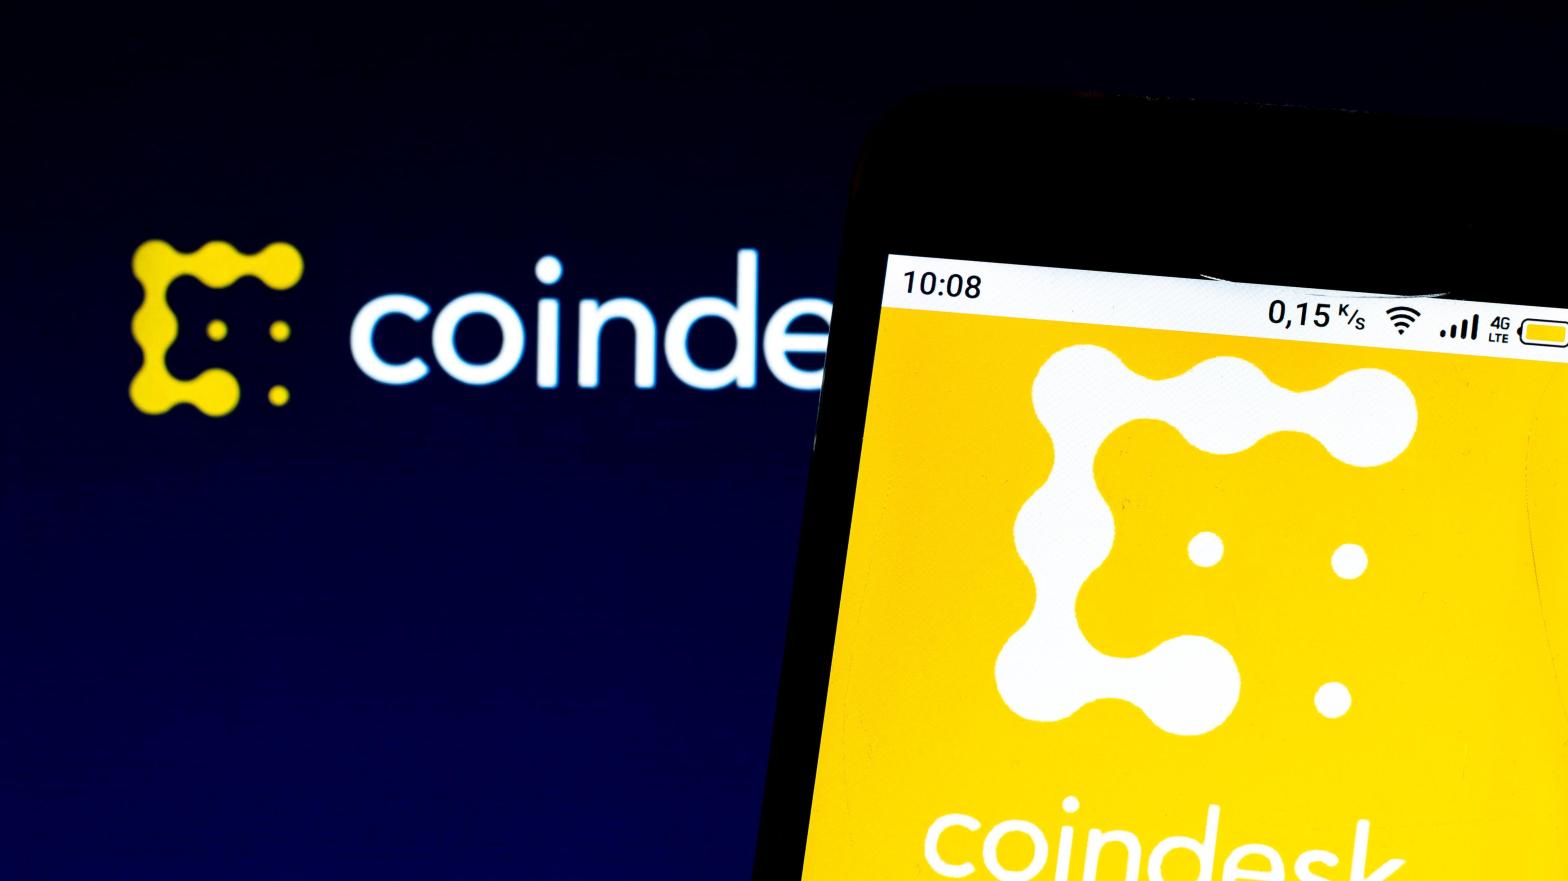 CoinDesk is reportedly mulling over a potential sale as its parent company Digital Commodities Group suffers the results of the FTX fallout, which was ironically first revealed by CoinDesk. (Image: IgorGolovniov, Shutterstock)